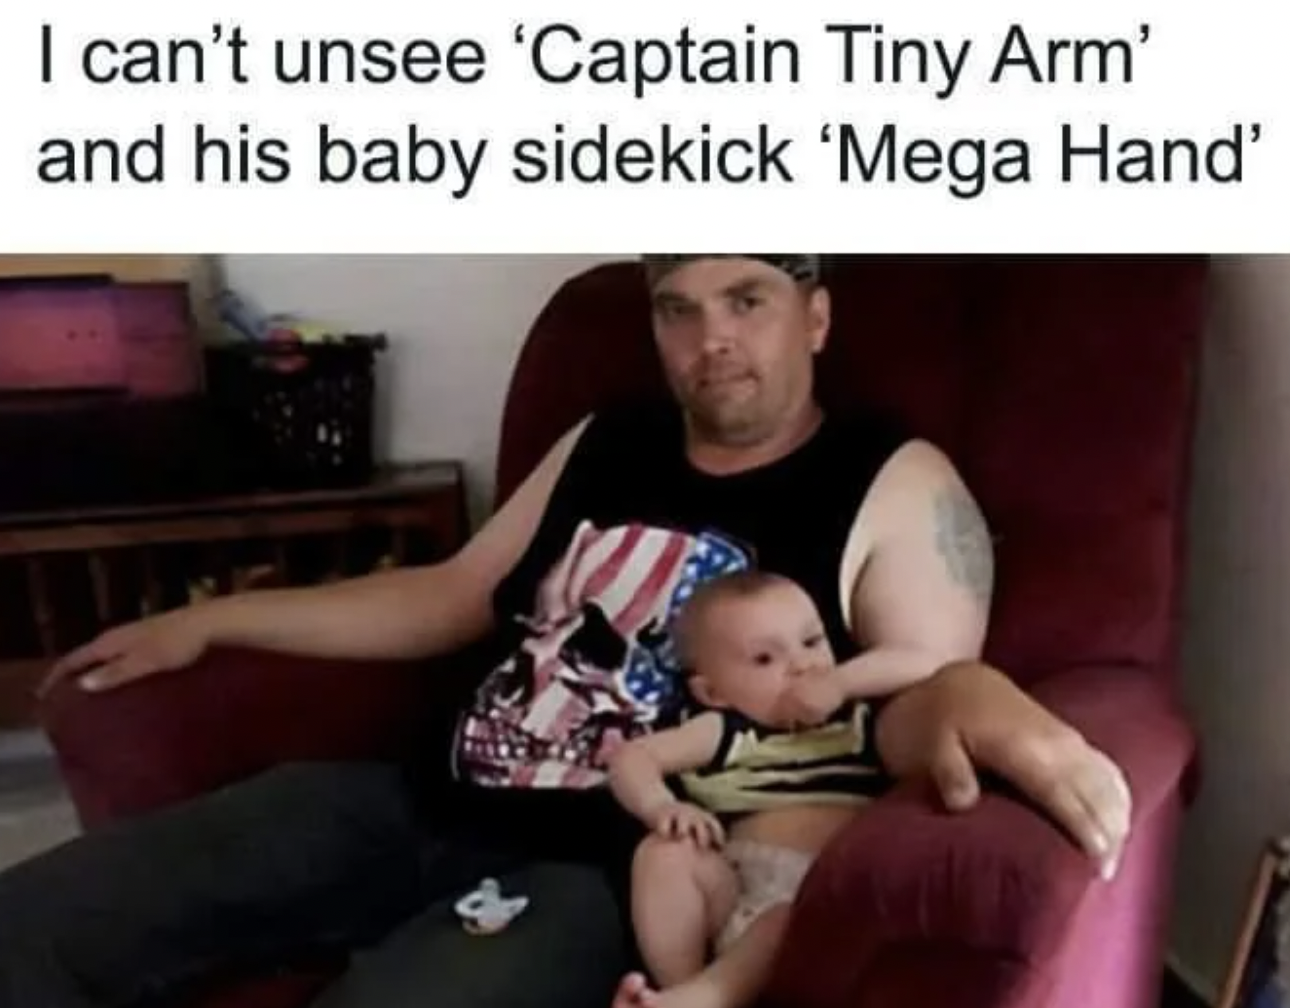 captain tiny arm mega hand - I can't unsee 'Captain Tiny Arm' and his baby sidekick 'Mega Hand'